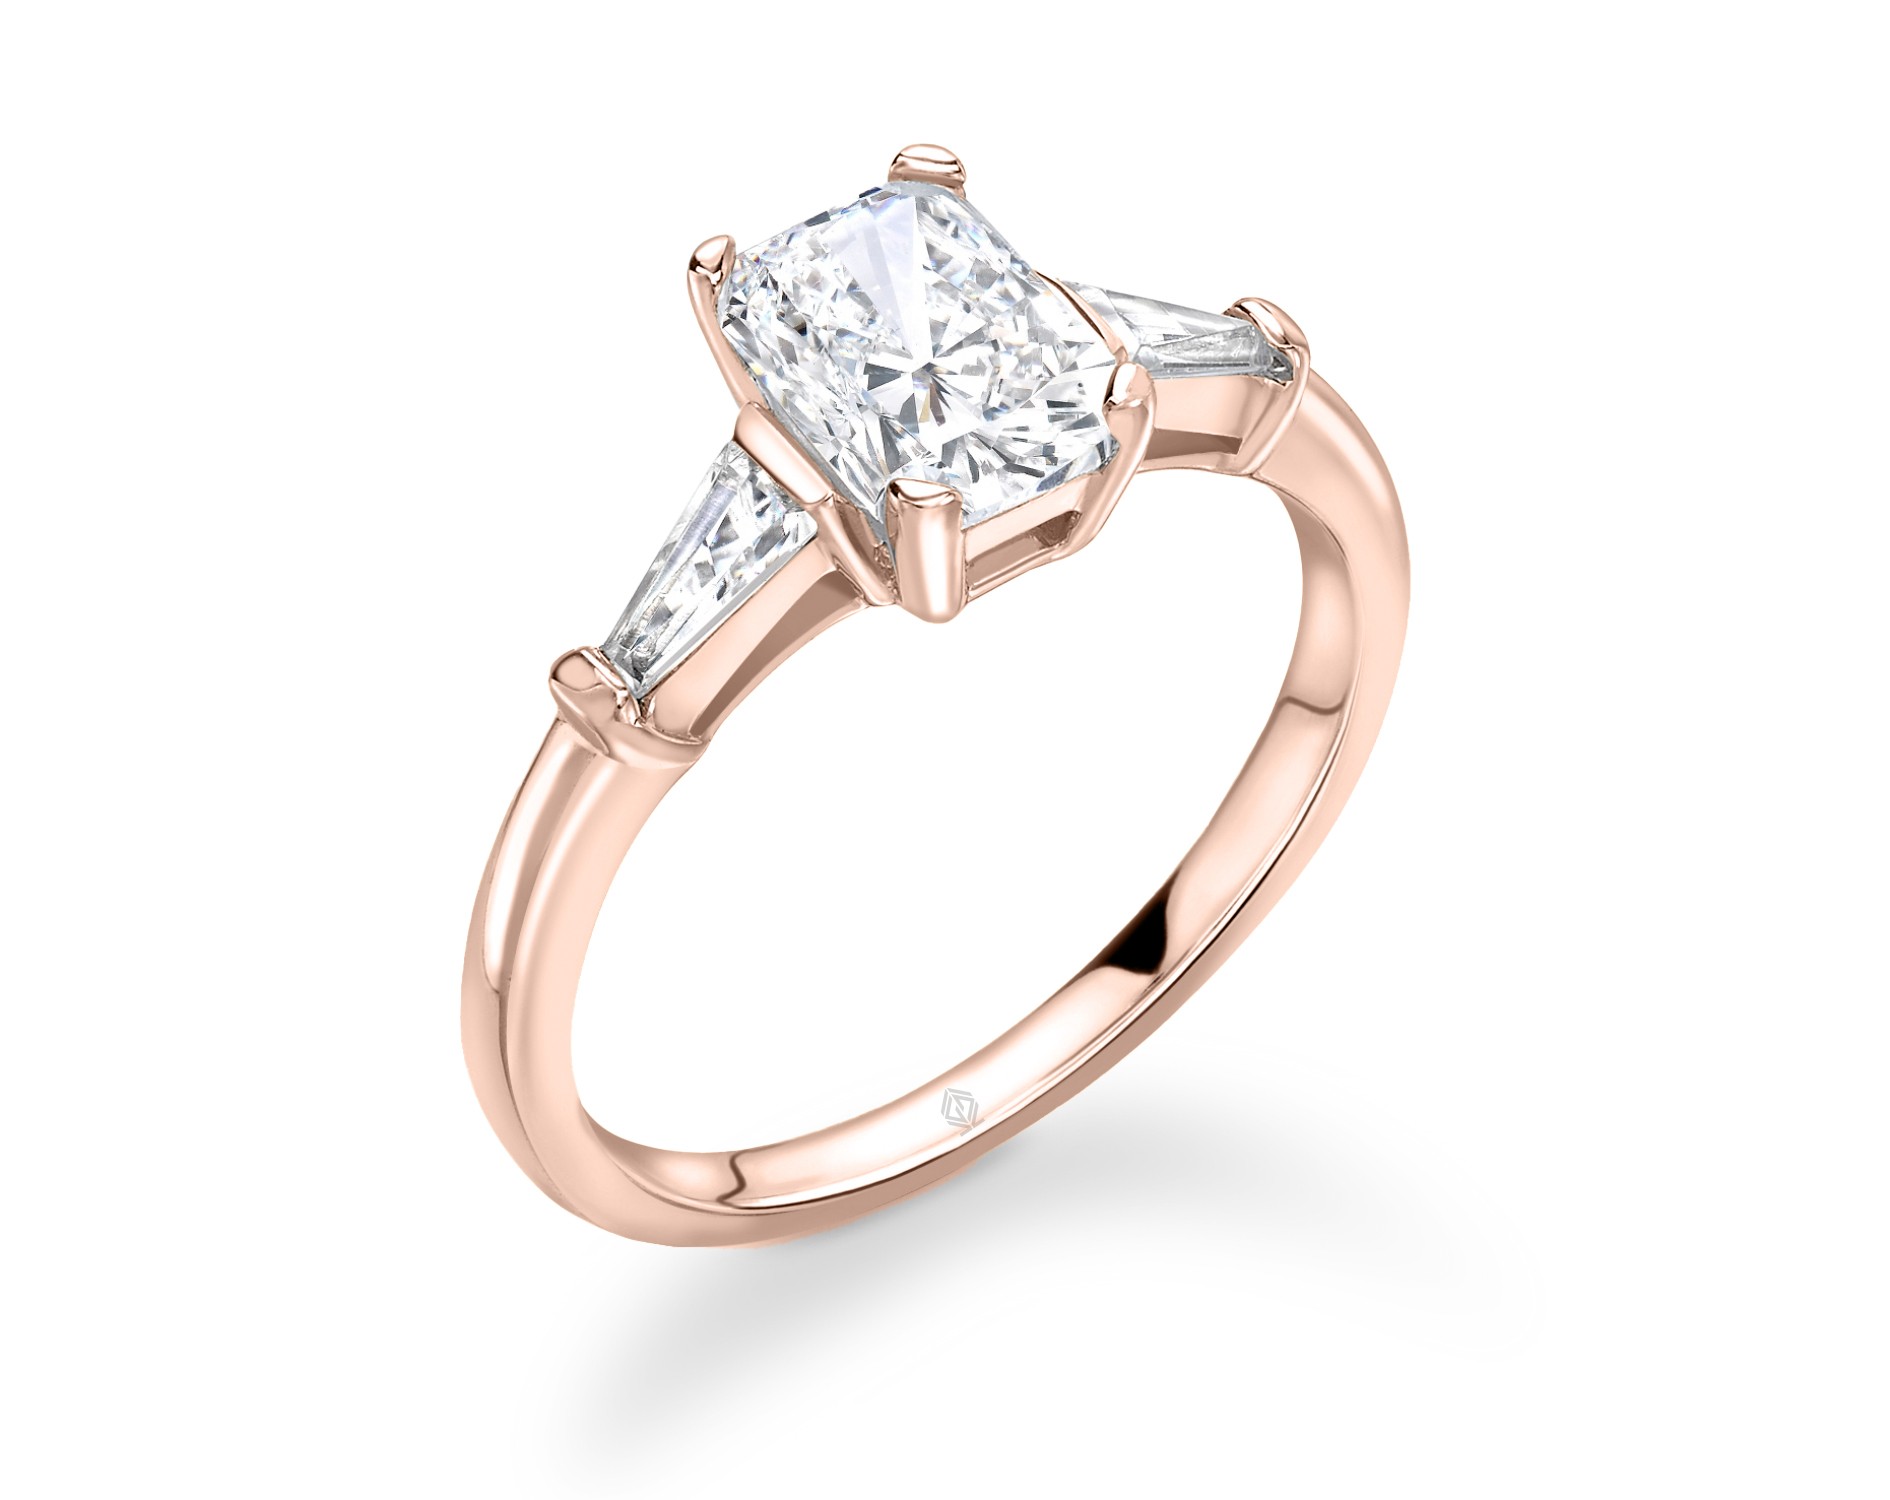 18K ROSE GOLD EMERALD CUT DIAMOND RING WITH BAGUETTES CUT SIDE STONES